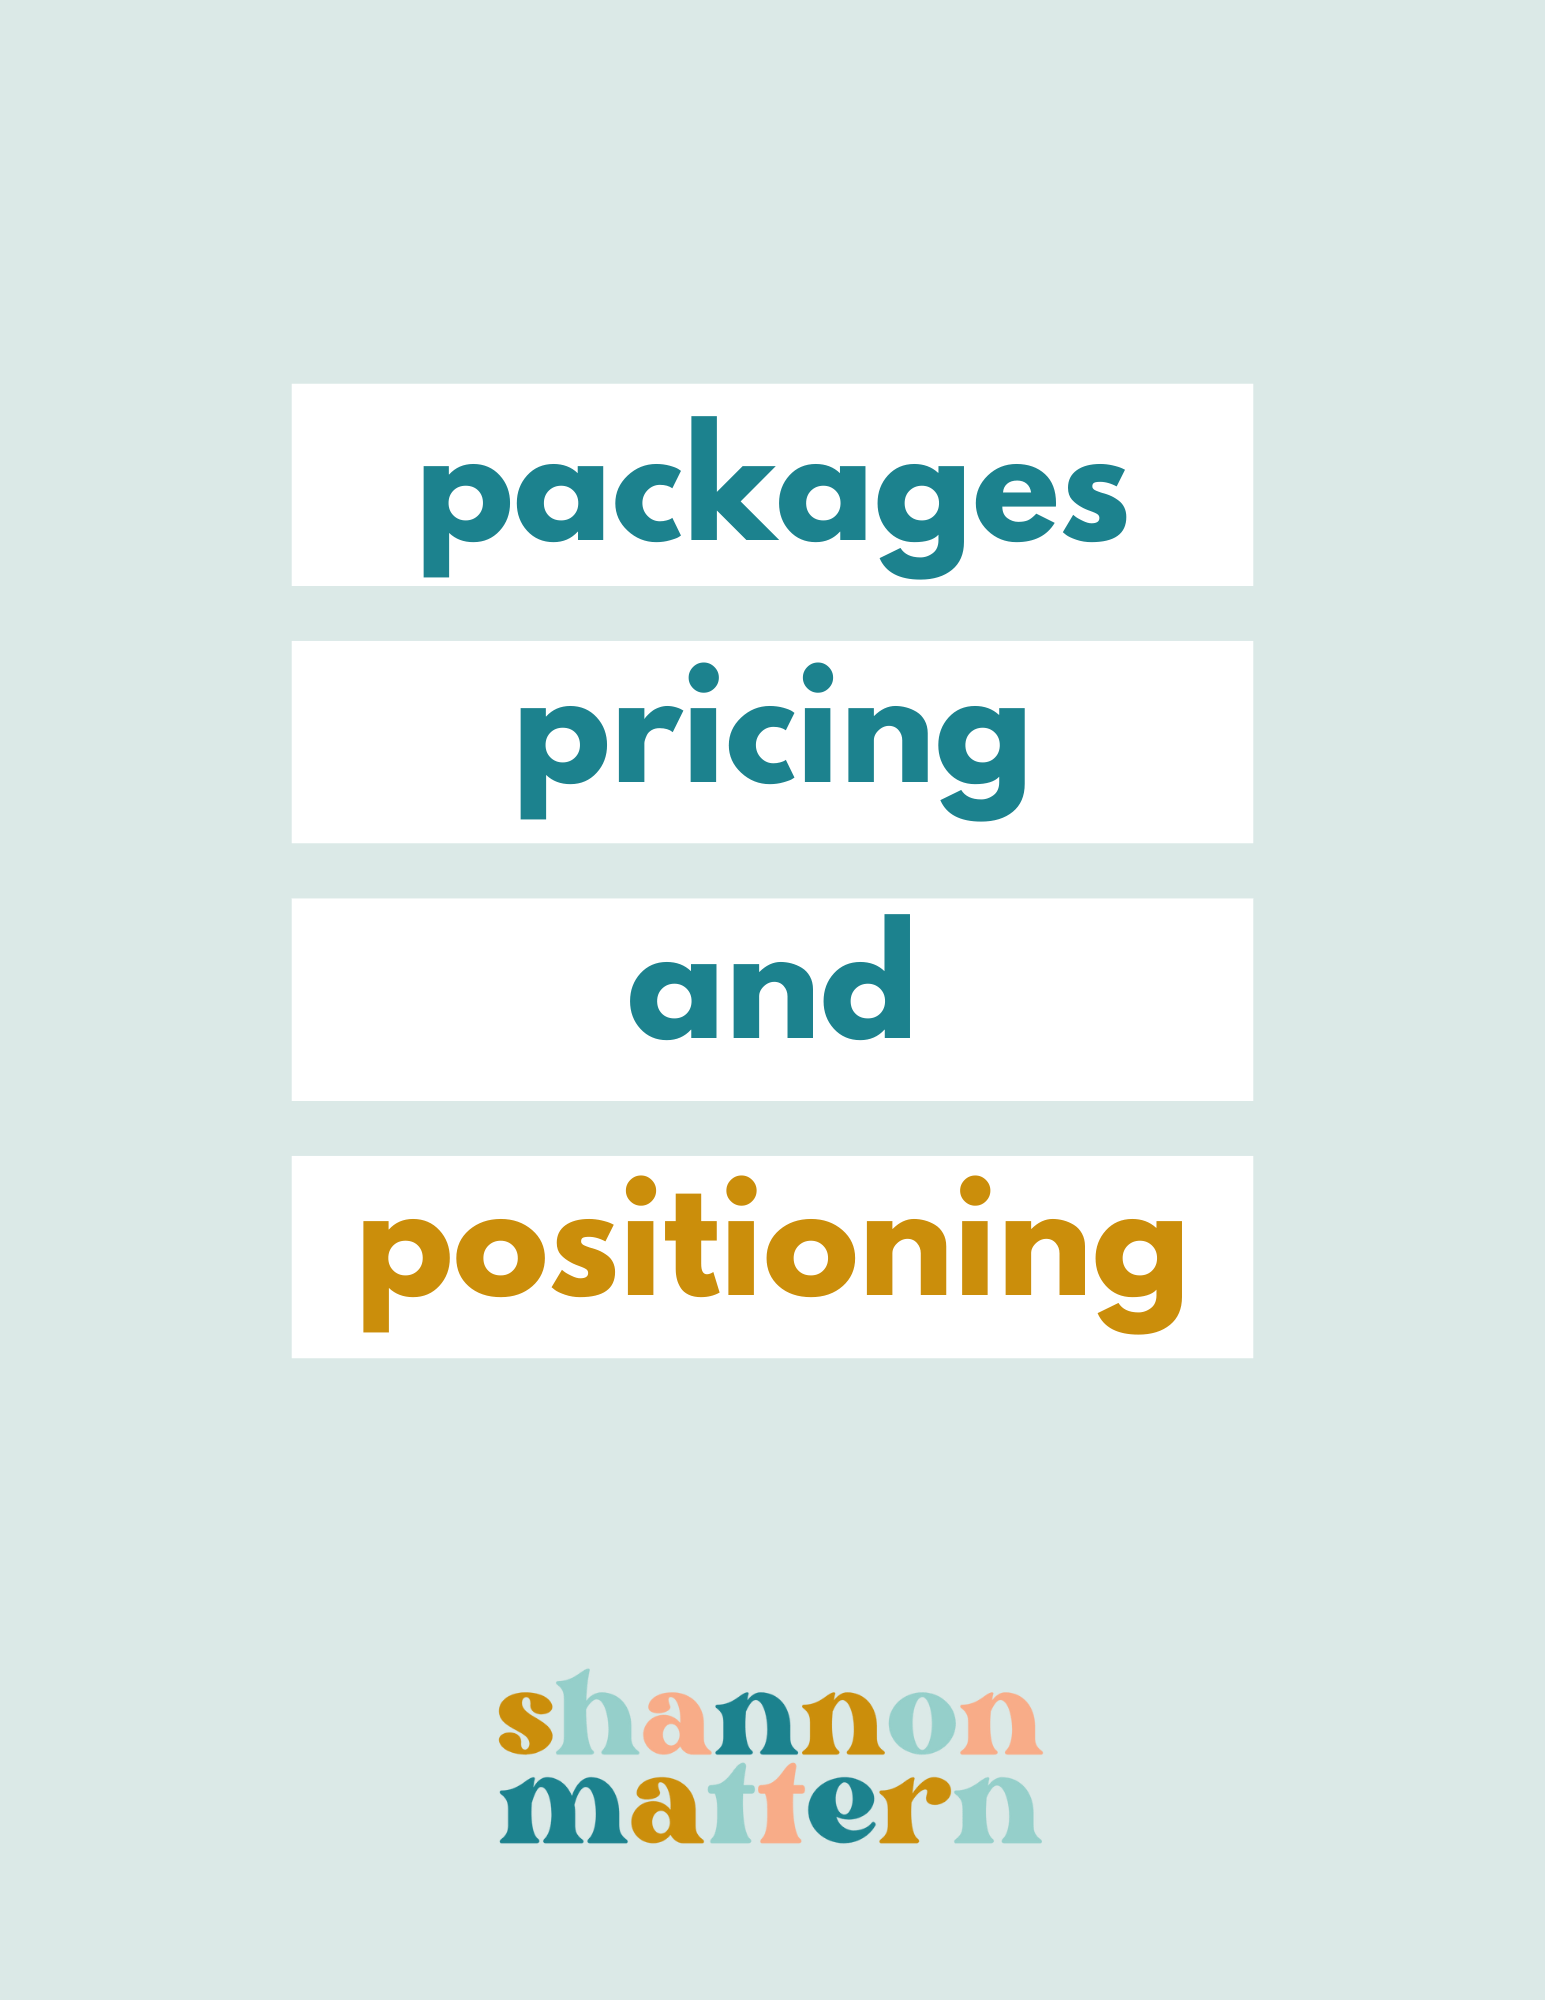 The image shows packages being priced and positioned according to Shannon Mattern's strategy. Full Text: packages pricing and positioning shannon mattern